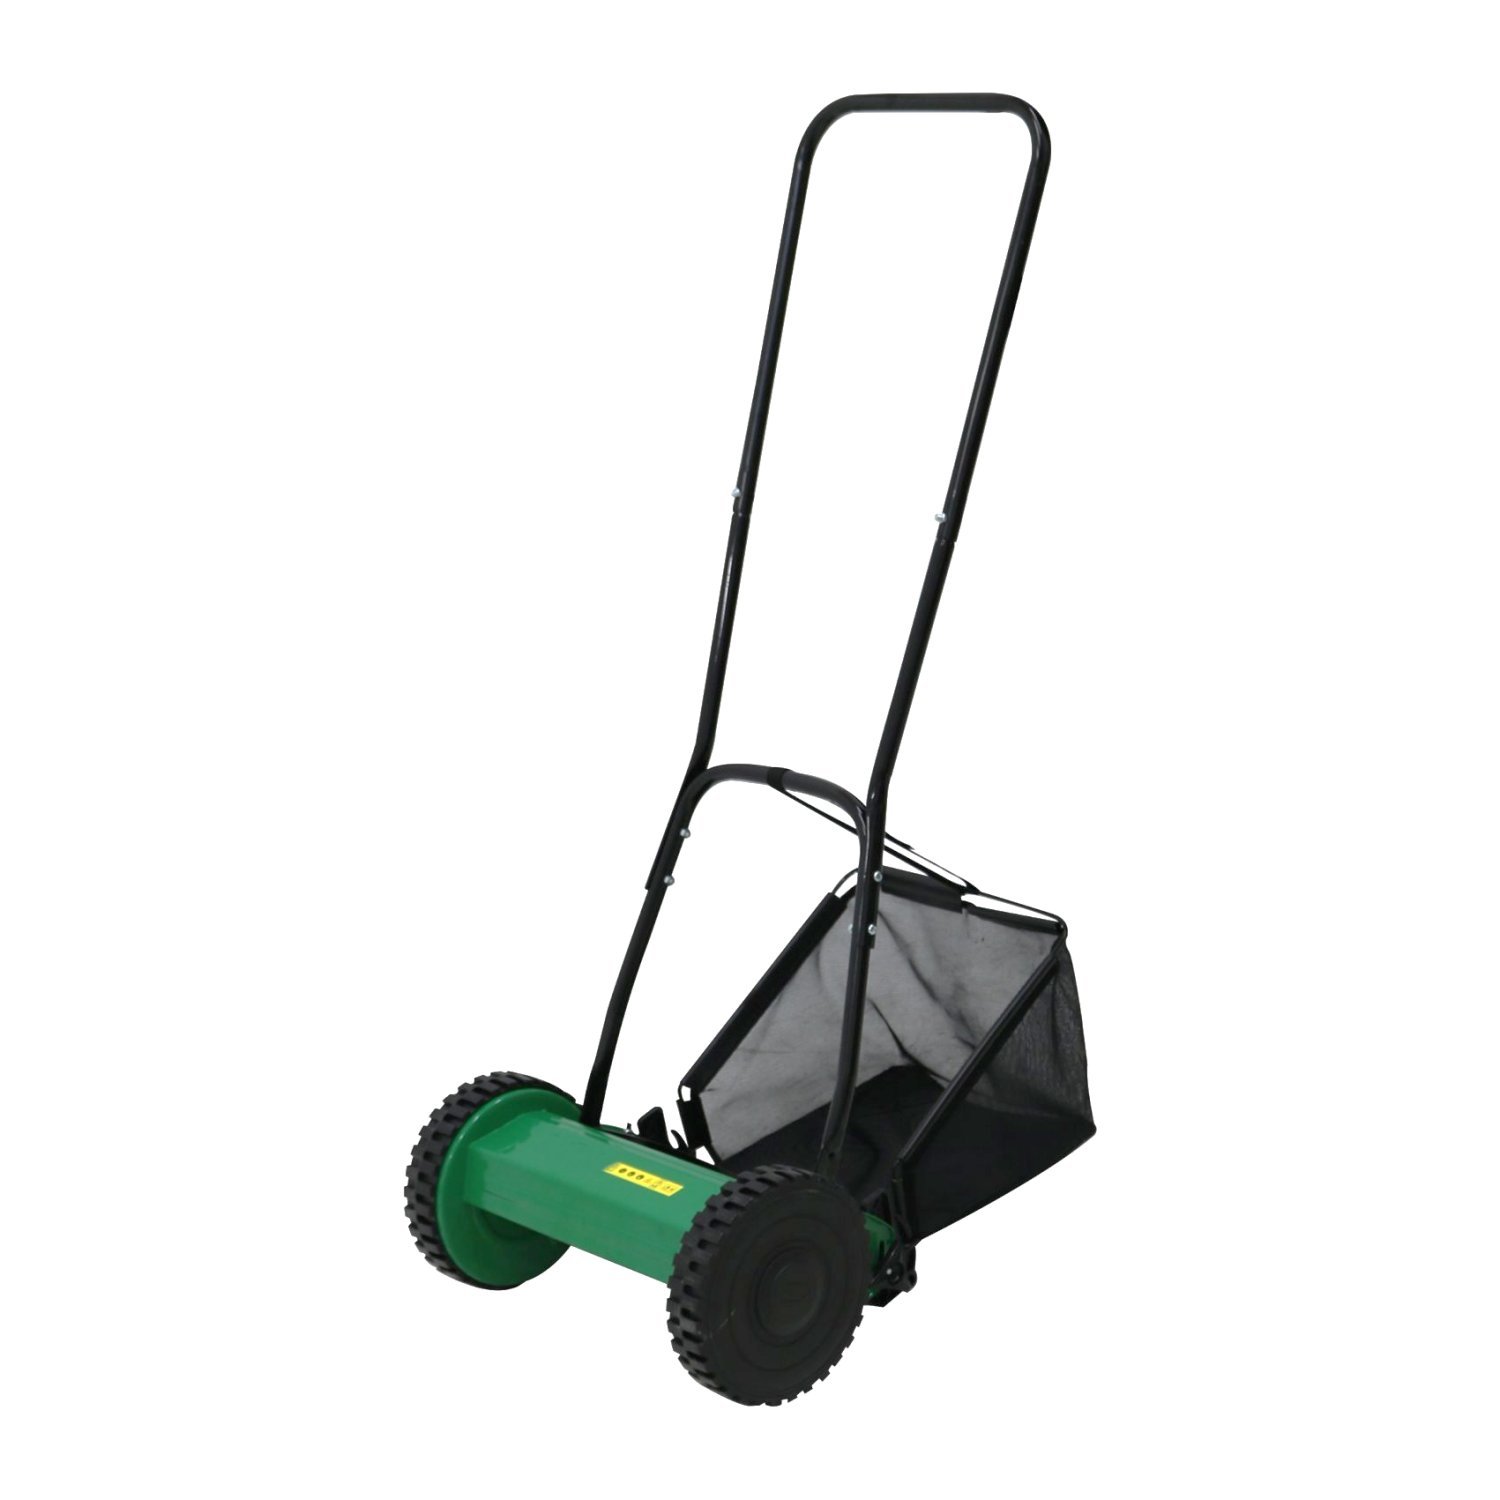 Manual Hand Push Grass Lawn Mower Lawnmower 30cm Cutting Width - Click Image to Close